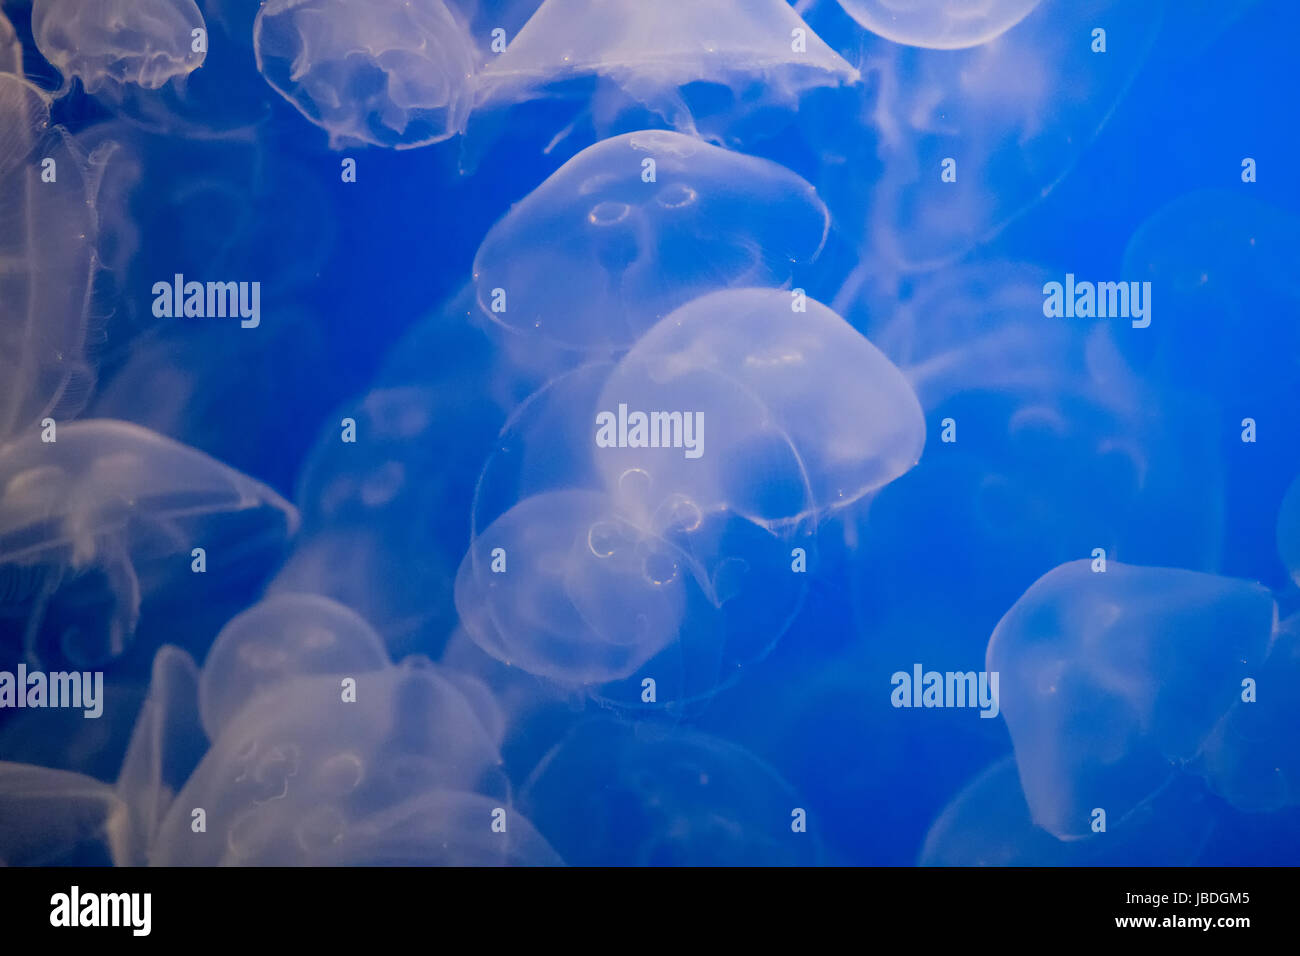 Jelly Fish swimming in ocean Banque D'Images